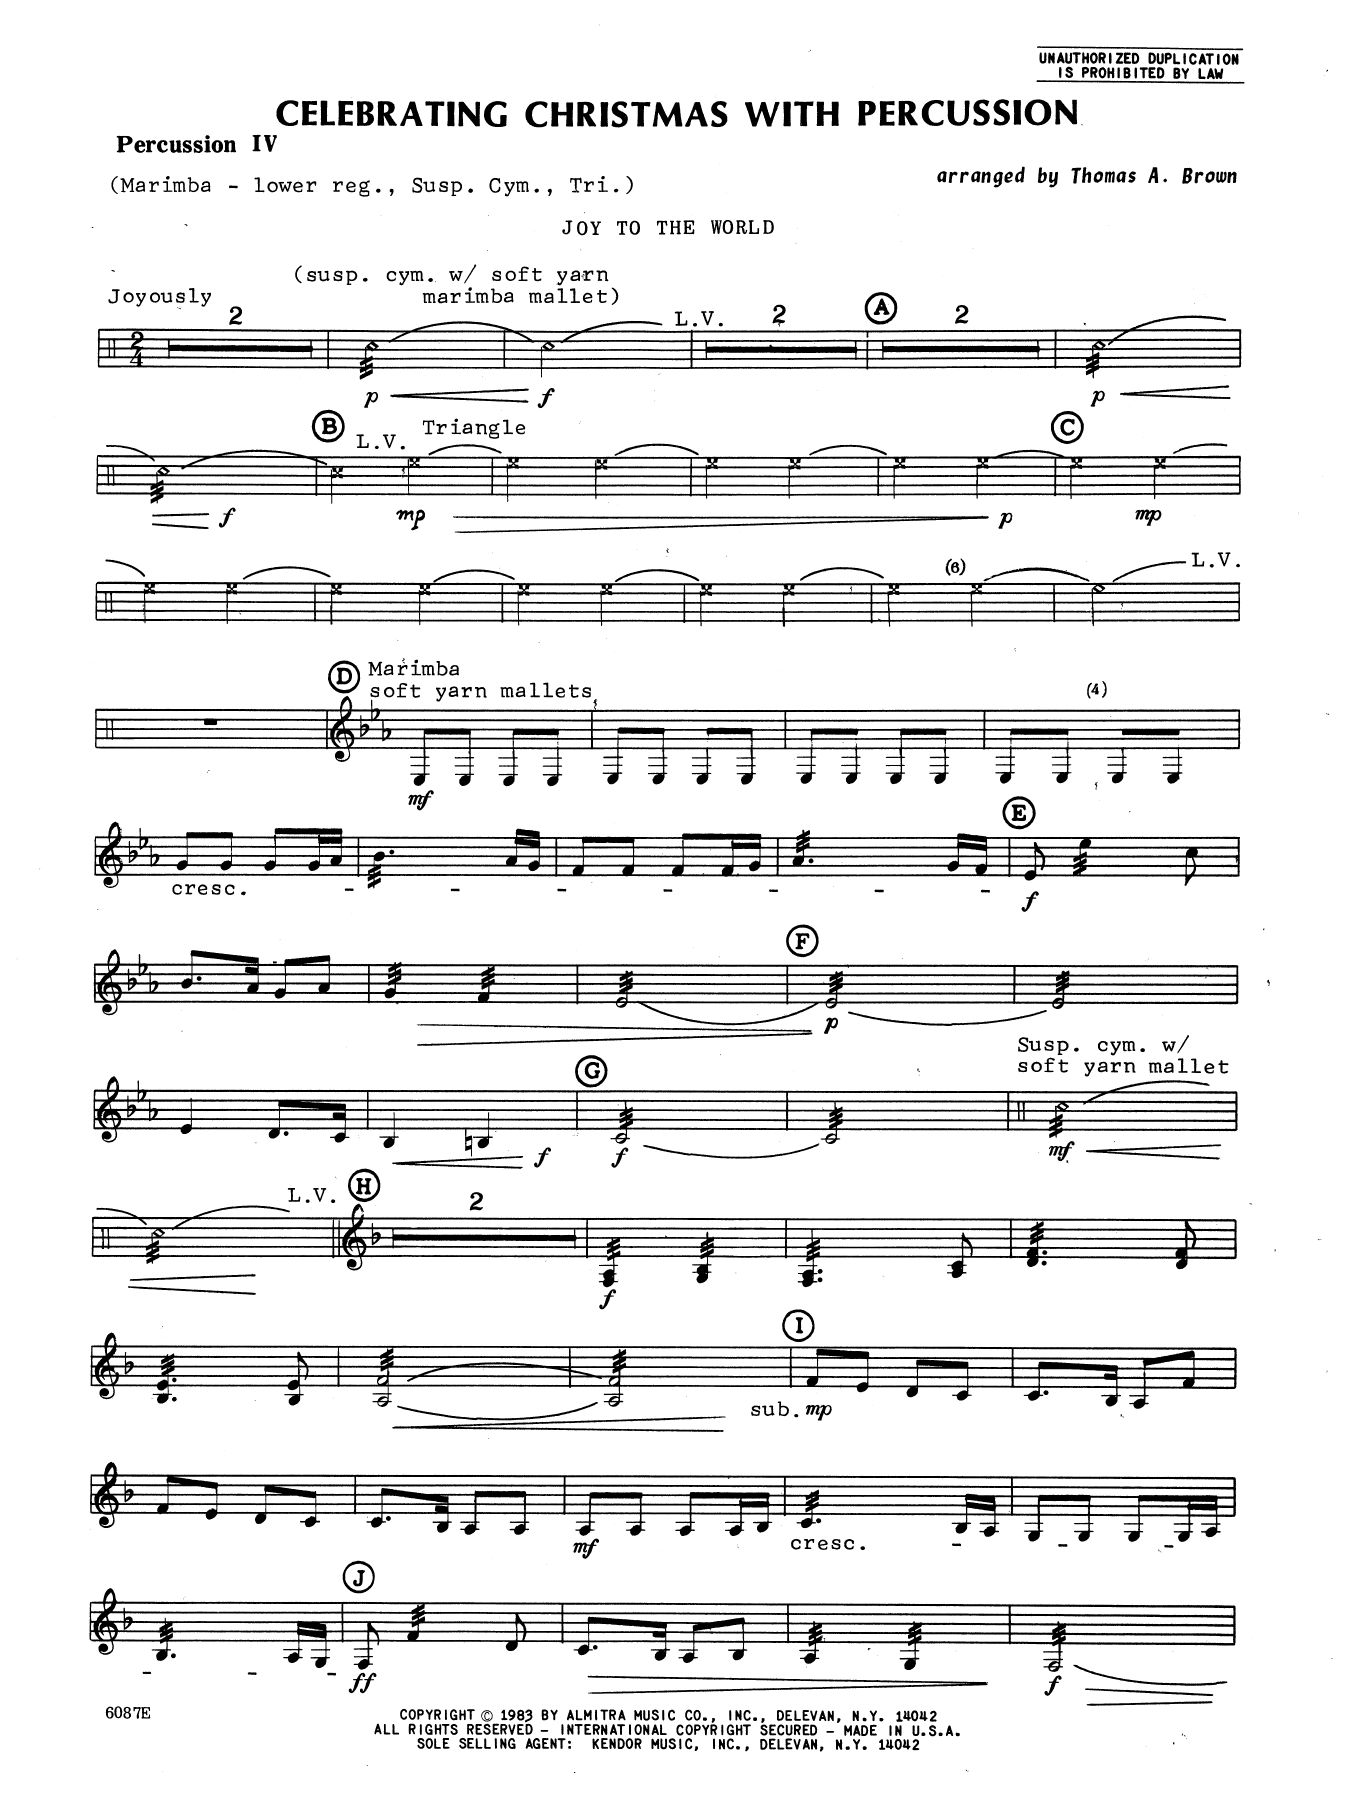 Download Tom Brown Celebrating Christmas With Percussion, Sheet Music